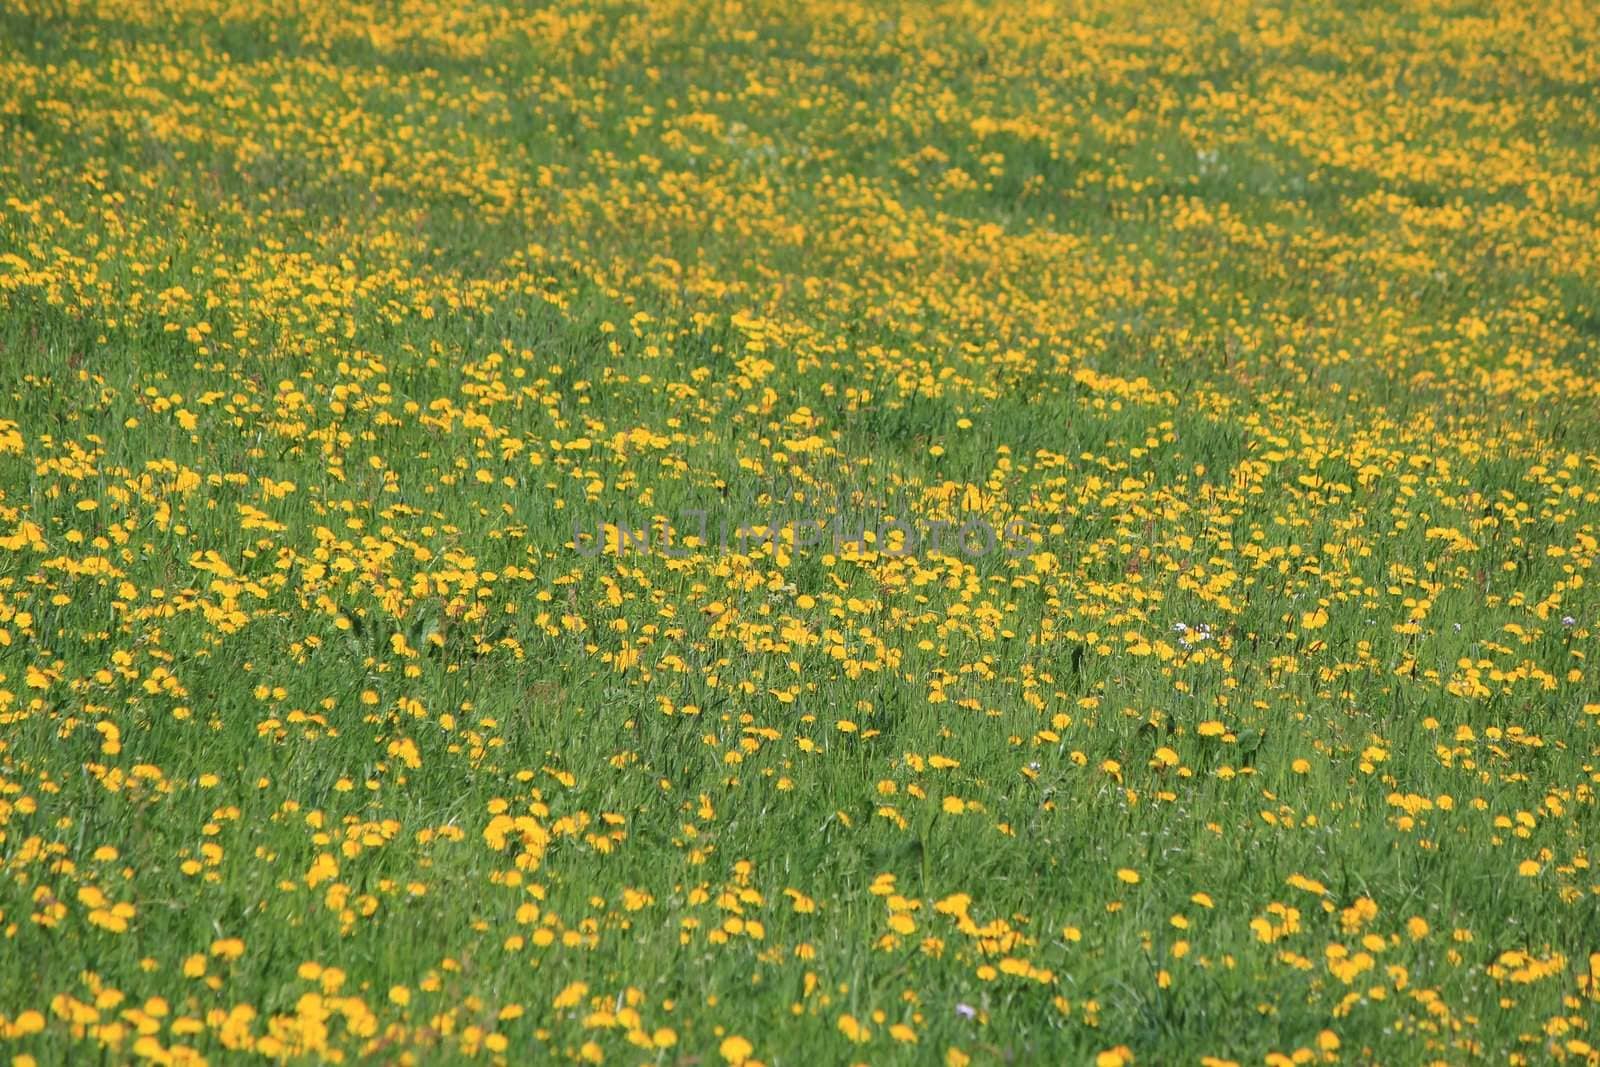 Green grass with lots of yellow dandelion flowers as texture